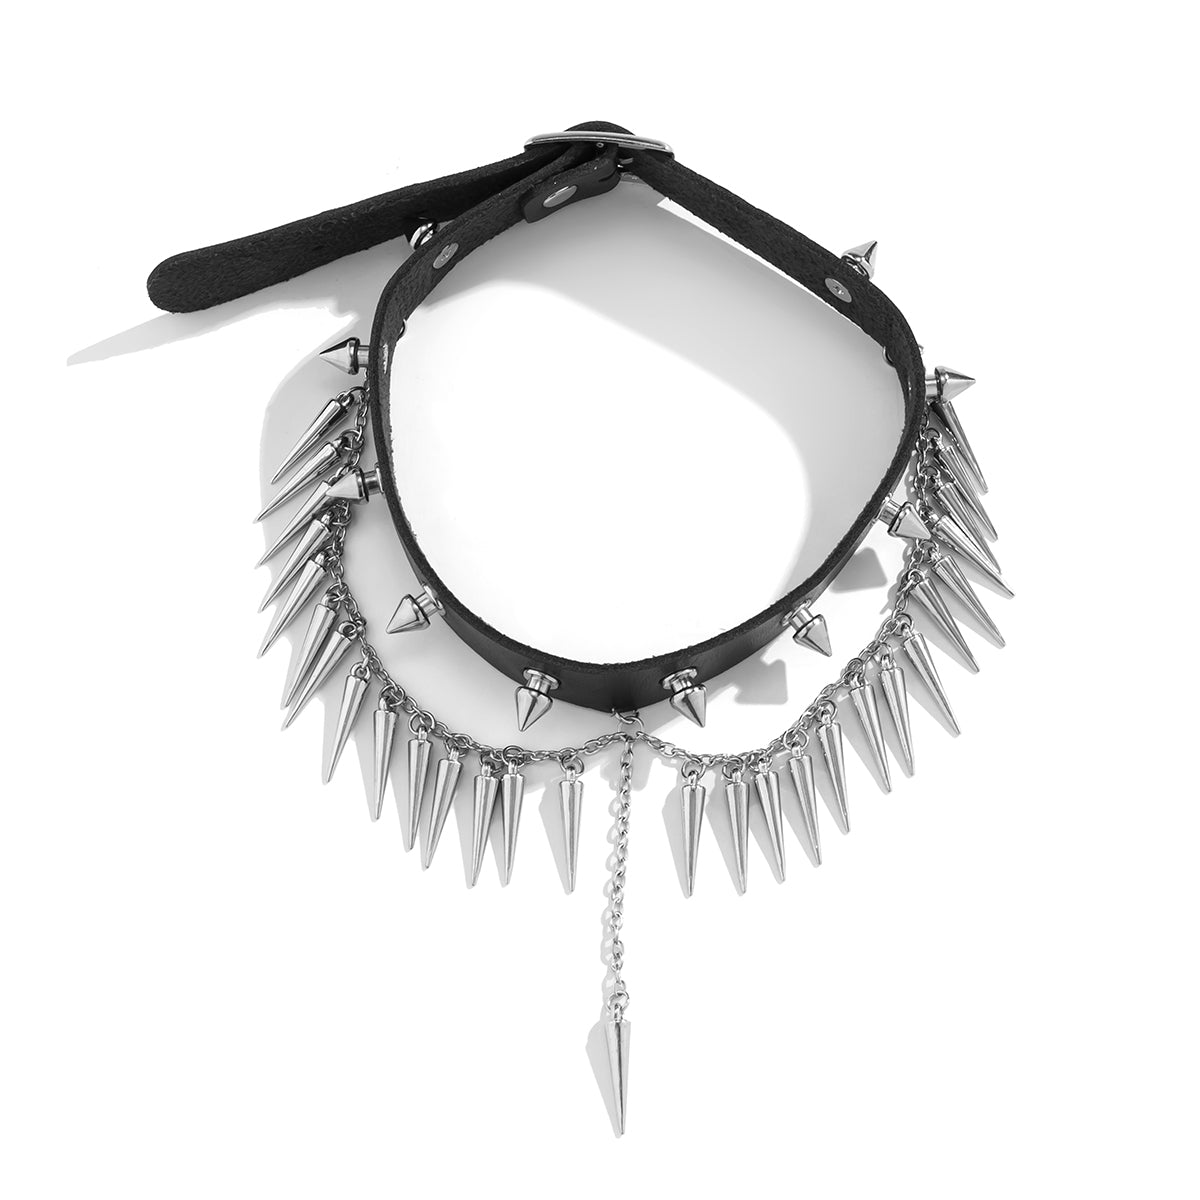 Black Polystyrene & Silver-Plated Spike Layered Choker Necklace